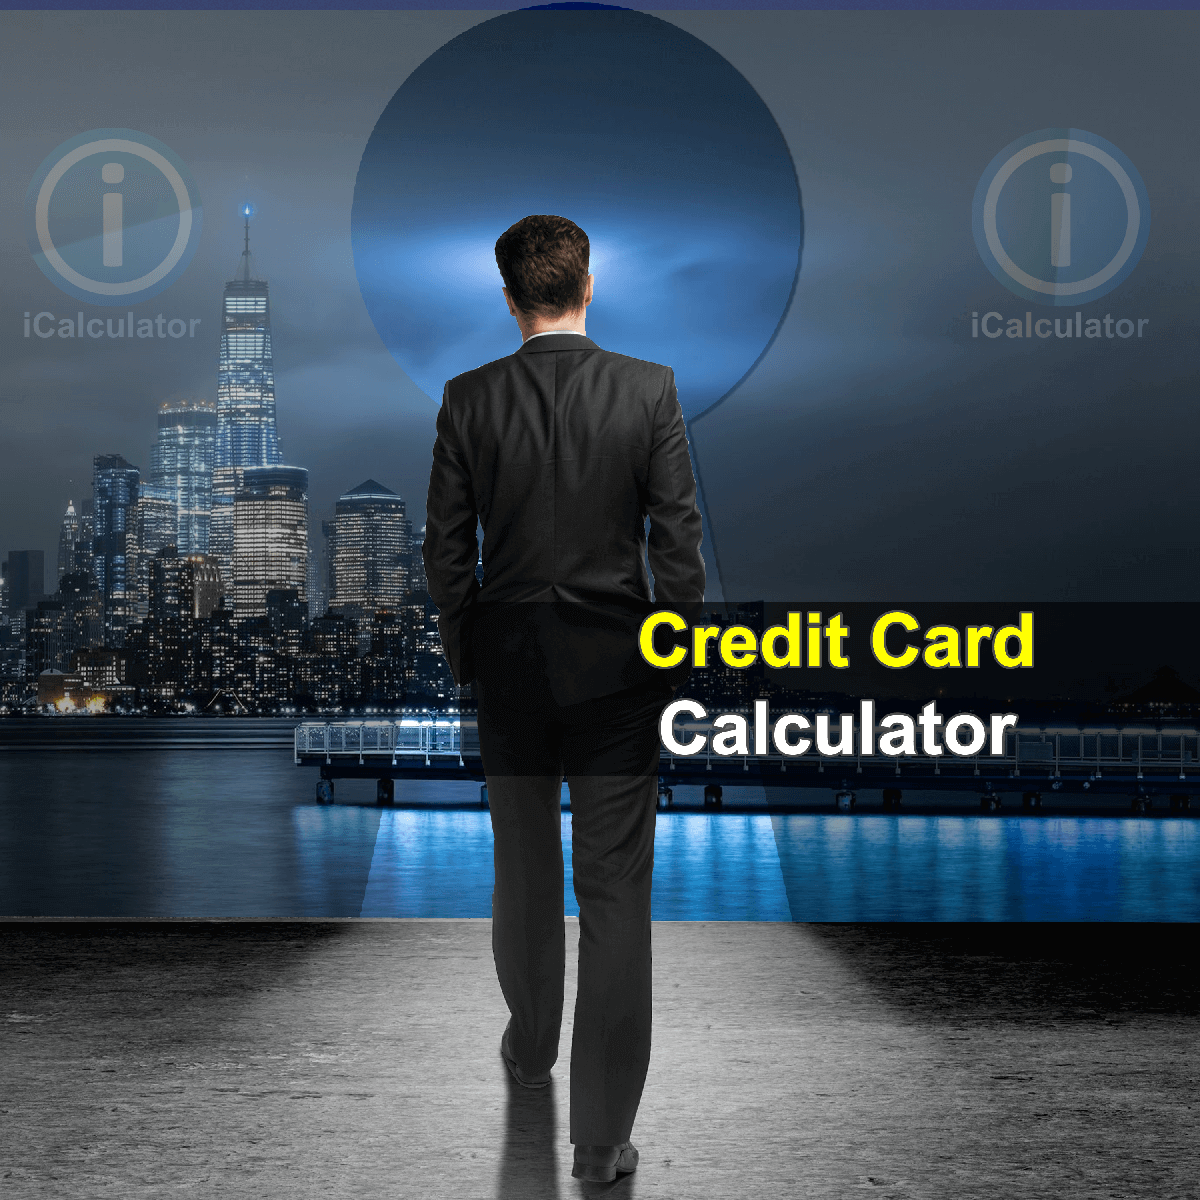 Credit Card Minimum Payment Calculator. This image provides details of how to calculate Credit Card Minimum Payments using a calculator and notepad. By using the credit card payment formula, the Credit Card Minimum Payment Calculator provides a true calculation of the minimum monthly repayments on a credit card and the total amount that will be repaid in interest.